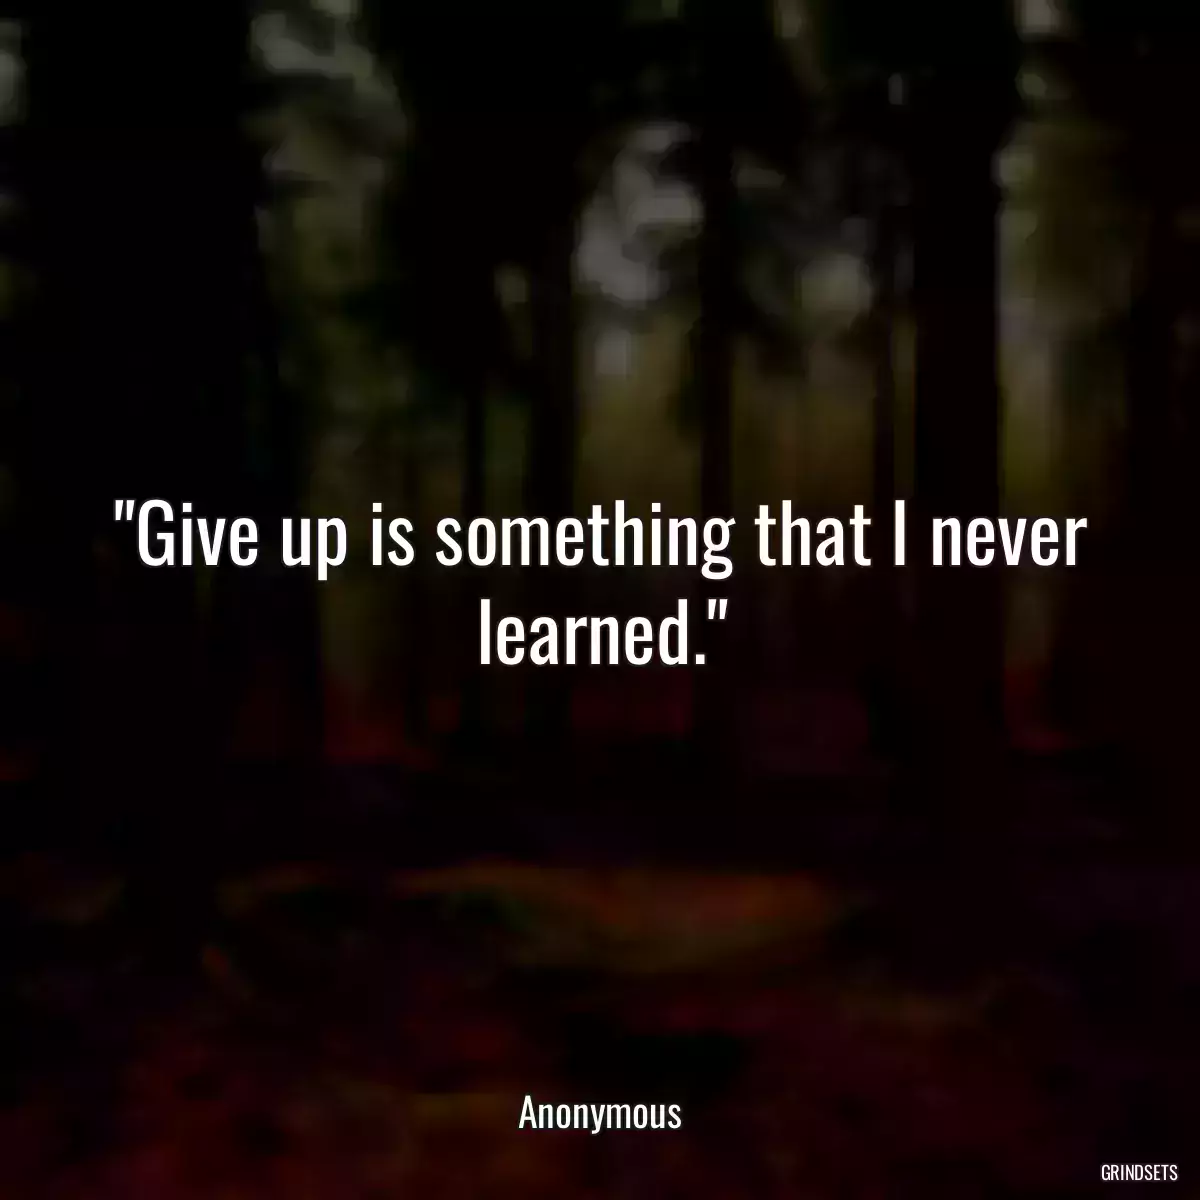 Give up is something that I never learned.